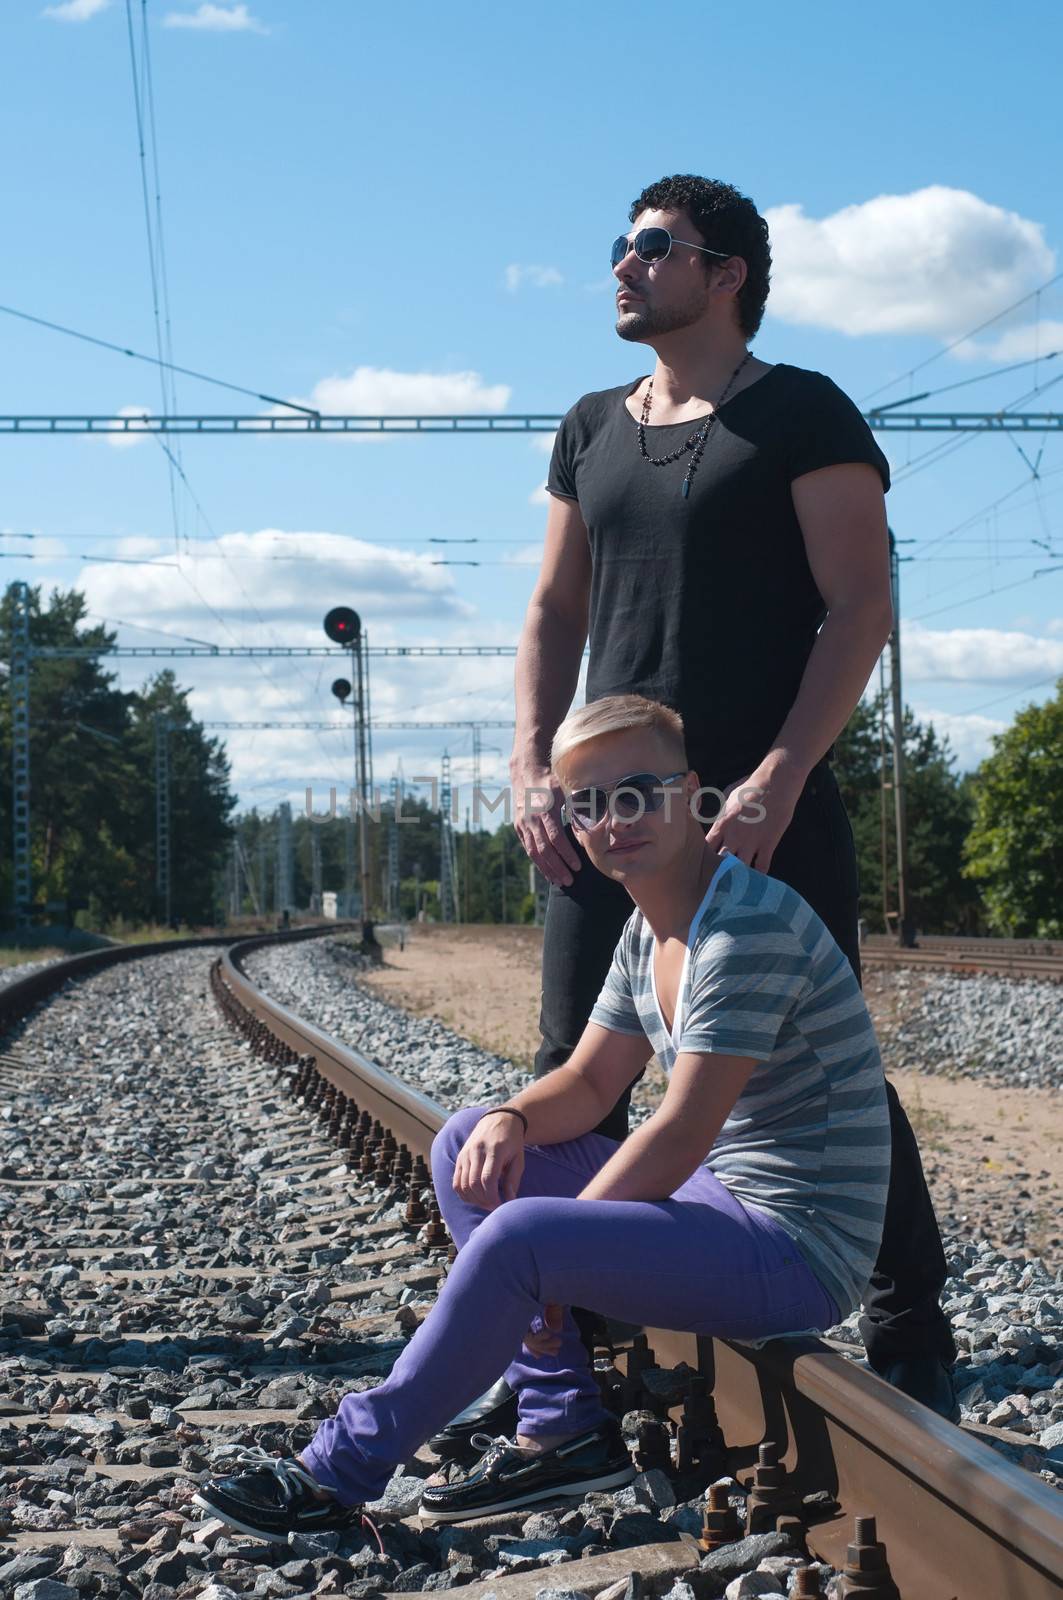 Two young men on train tracks by anytka